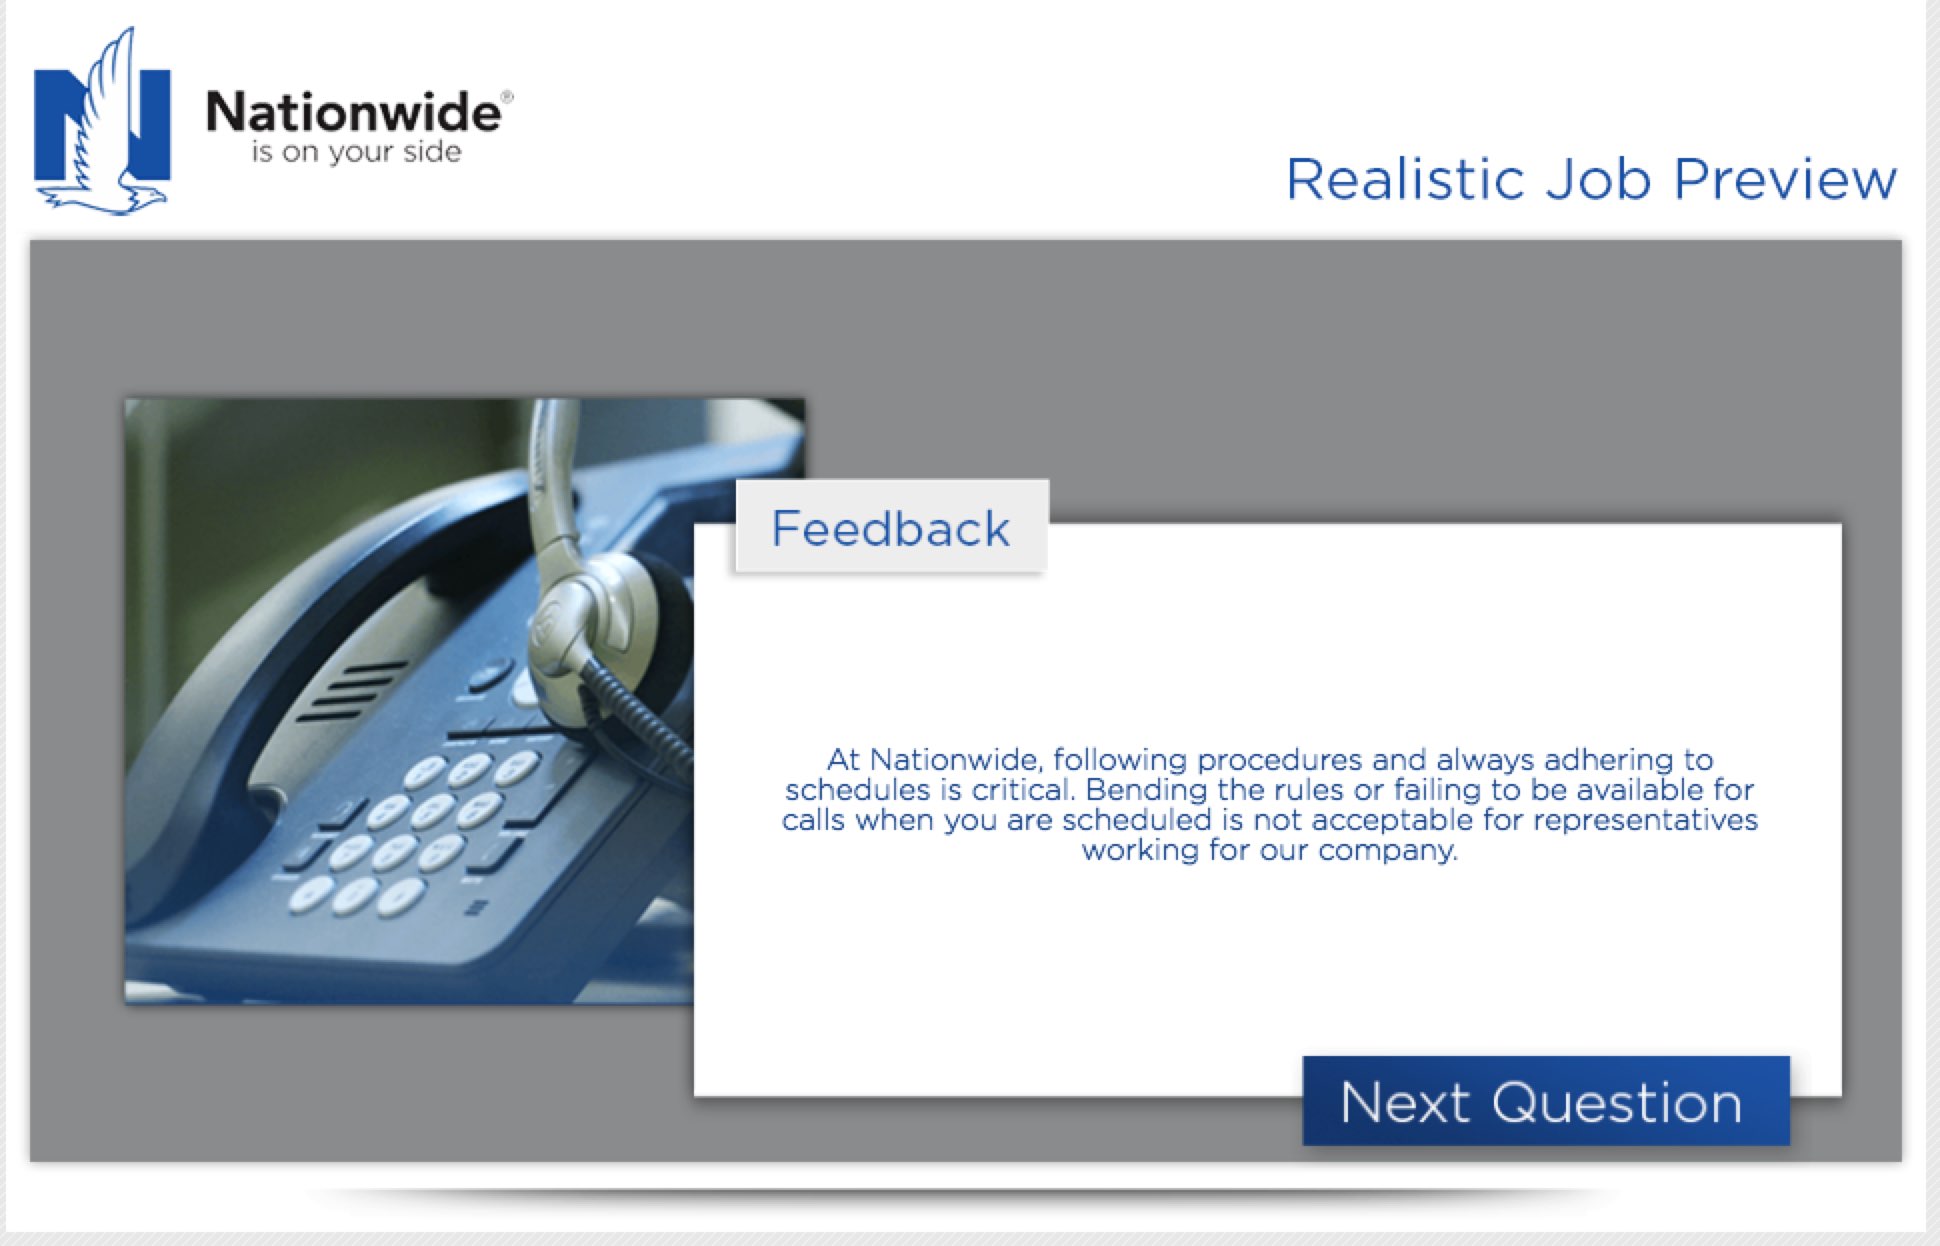 RJP Realistic Job Preview example Nationwide Insurance | Ongig